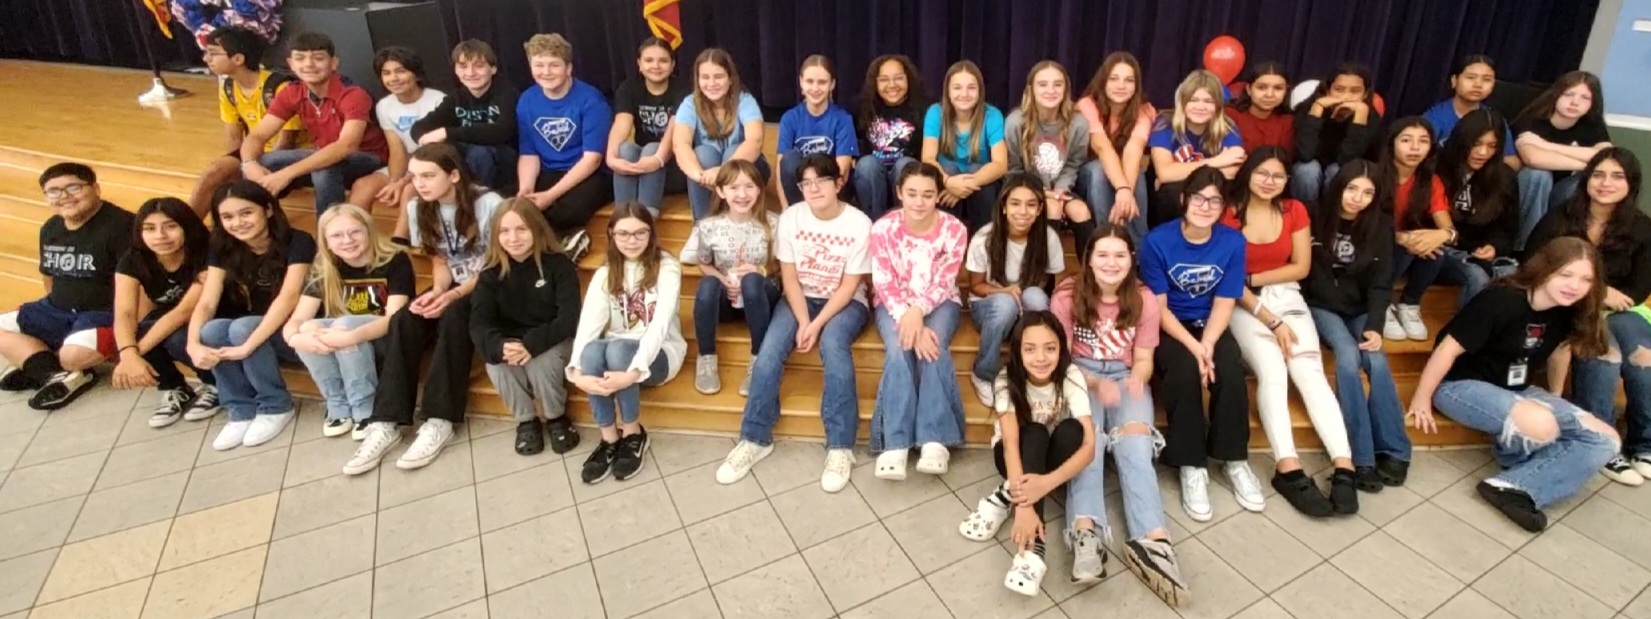 NJHS Students pose for a quick picture before our guests arrived.